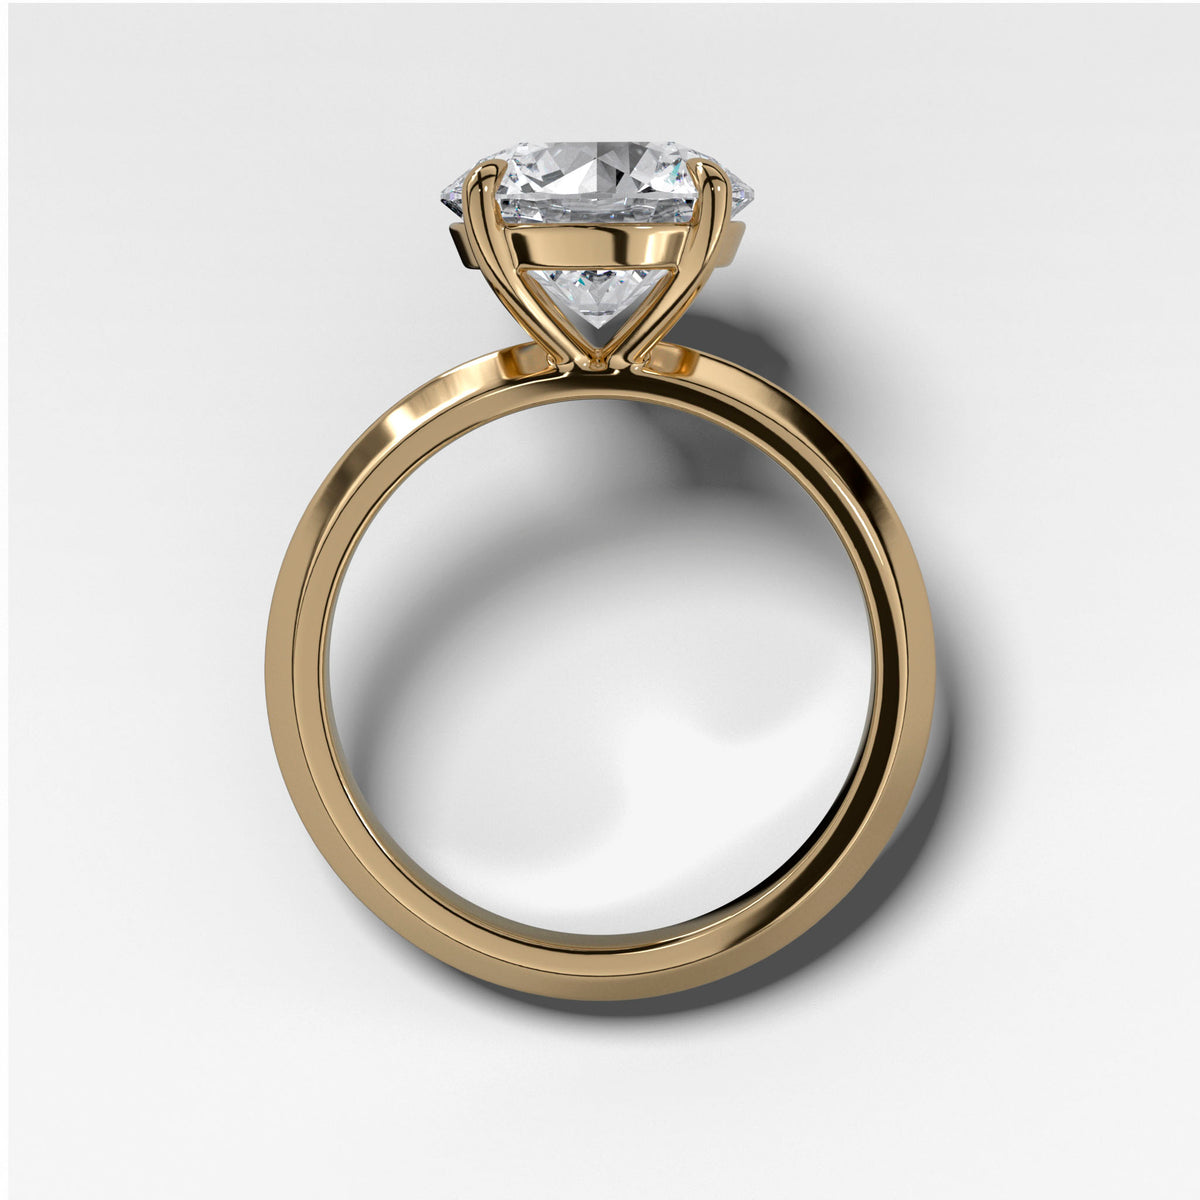 Butter Knife Solitaire Engagement Ring With Round Cut Diamond